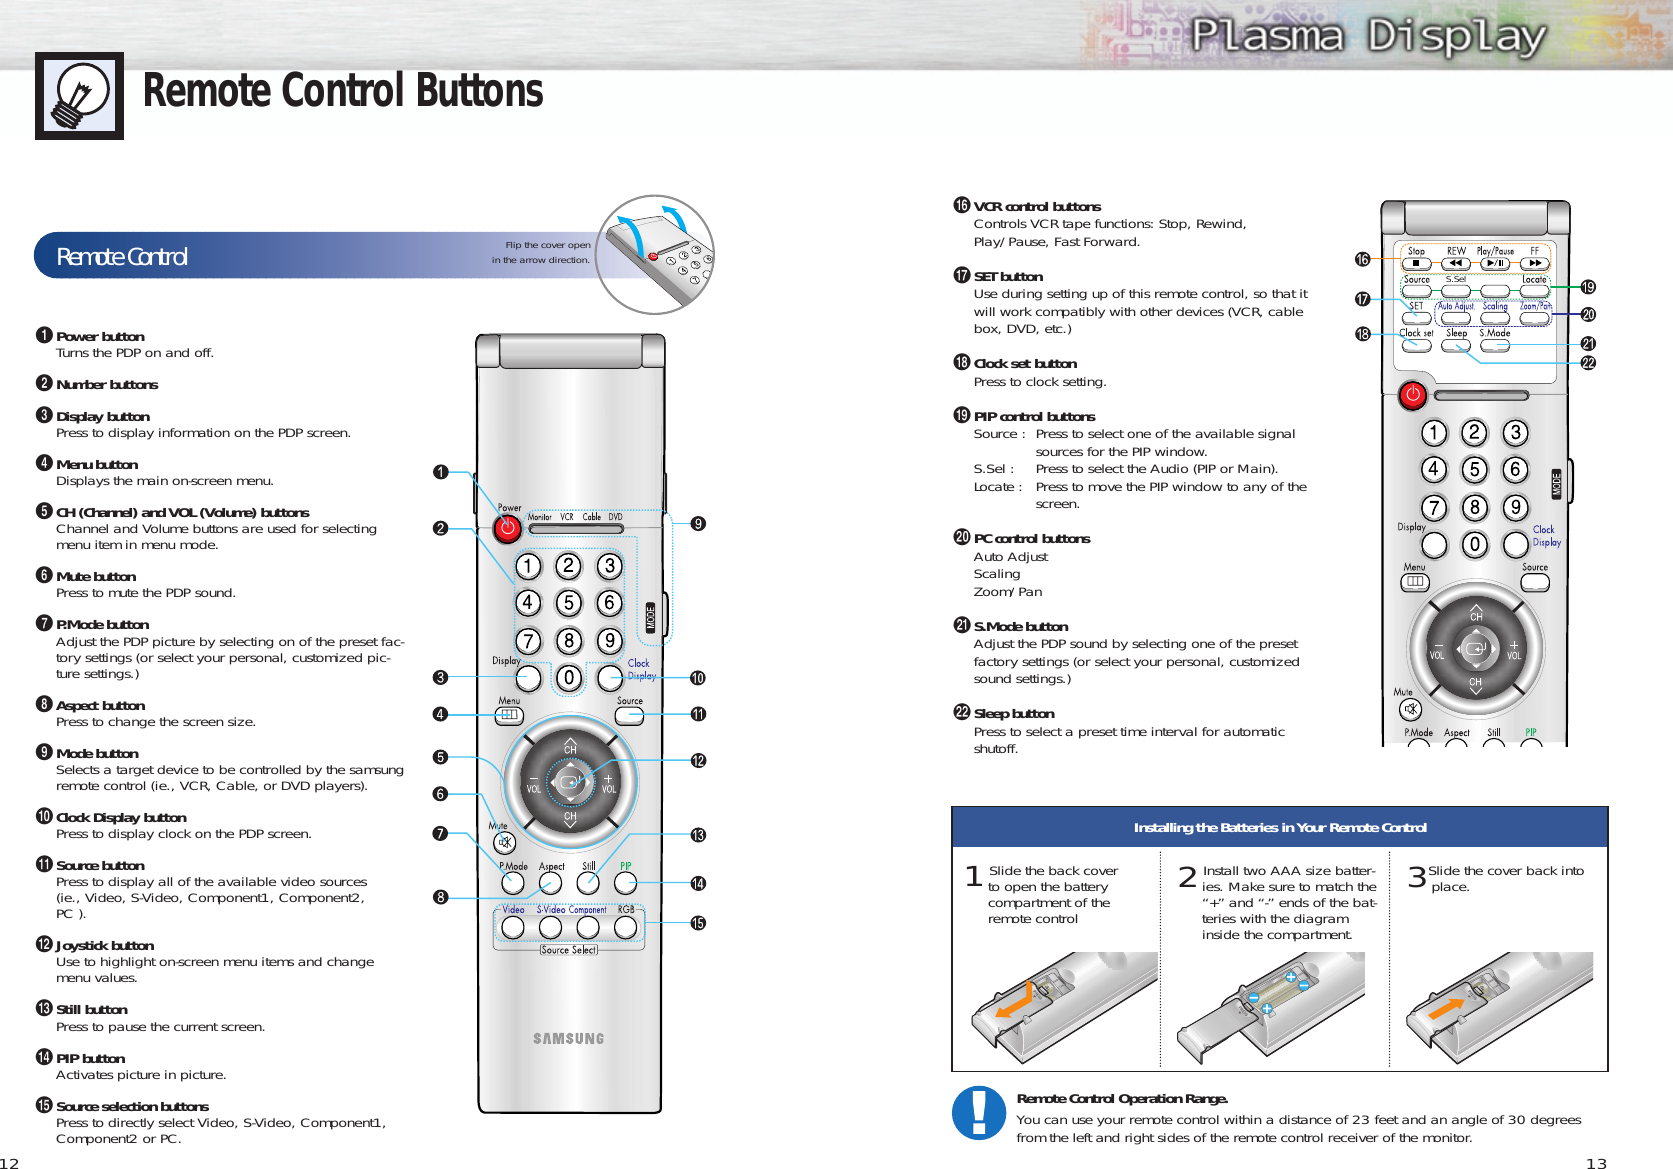 ıVCR control buttonsControls VCR tape functions: Stop, Rewind,Play/Pause, Fast Forward.˜SET buttonUse during setting up of this remote control, so that itwill work compatibly with other devices (VCR, cablebox, DVD, etc.)¯Clock set buttonPress to clock setting.˘PIP control buttonsSource : Press to select one of the available signalsources for the PIP window.S.Sel : Press to select the Audio (PIP or Main).Locate : Press to move the PIP window to any of thescreen.¿PC control buttonsAuto AdjustScalingZoom/Pan¸S.Mode buttonAdjust the PDP sound by selecting one of the presetfactory settings (or select your personal, customizedsound settings.)˛Sleep buttonPress to select a preset time interval for automatic shutoff.S.Sel13Remote Control ButtonsŒPower buttonTurns the PDP on and off.´Number buttonsˇDisplay buttonPress to display information on the PDP screen.¨Menu buttonDisplays the main on-screen menu.ˆCH (Channel) and VOL (Volume) buttonsChannel and Volume buttons are used for selectingmenu item in menu mode.ØMute buttonPress to mute the PDP sound.∏P.Mode buttonAdjust the PDP picture by selecting on of the preset fac-tory settings (or select your personal, customized pic-ture settings.)”Aspect buttonPress to change the screen size.’Mode buttonSelects a target device to be controlled by the samsungremote control (ie., VCR, Cable, or DVD players).˝Clock Display buttonPress to display clock on the PDP screen.ÔSource buttonPress to display all of the available video sources (ie., Video, S-Video, Component1, Component2, PC ).Joystick buttonUse to highlight on-screen menu items and changemenu values.ÒStill buttonPress to pause the current screen.ÚPIP buttonActivates picture in picture.ÆSource selection buttonsPress to directly select Video, S-Video, Component1,Component2 or PC. 12Remote ControlFlip the cover openin the arrow direction.Installing the Batteries in Your Remote Control1Slide the back coverto open the batterycompartment of theremote control3Slide the cover back intoplace.2Install two AAA size batter-ies. Make sure to match the“+” and “-” ends of the bat-teries with the diagraminside the compartment.Remote Control Operation Range.You can use your remote control within a distance of 23 feet and an angle of 30 degreesfrom the left and right sides of the remote control receiver of the monitor.